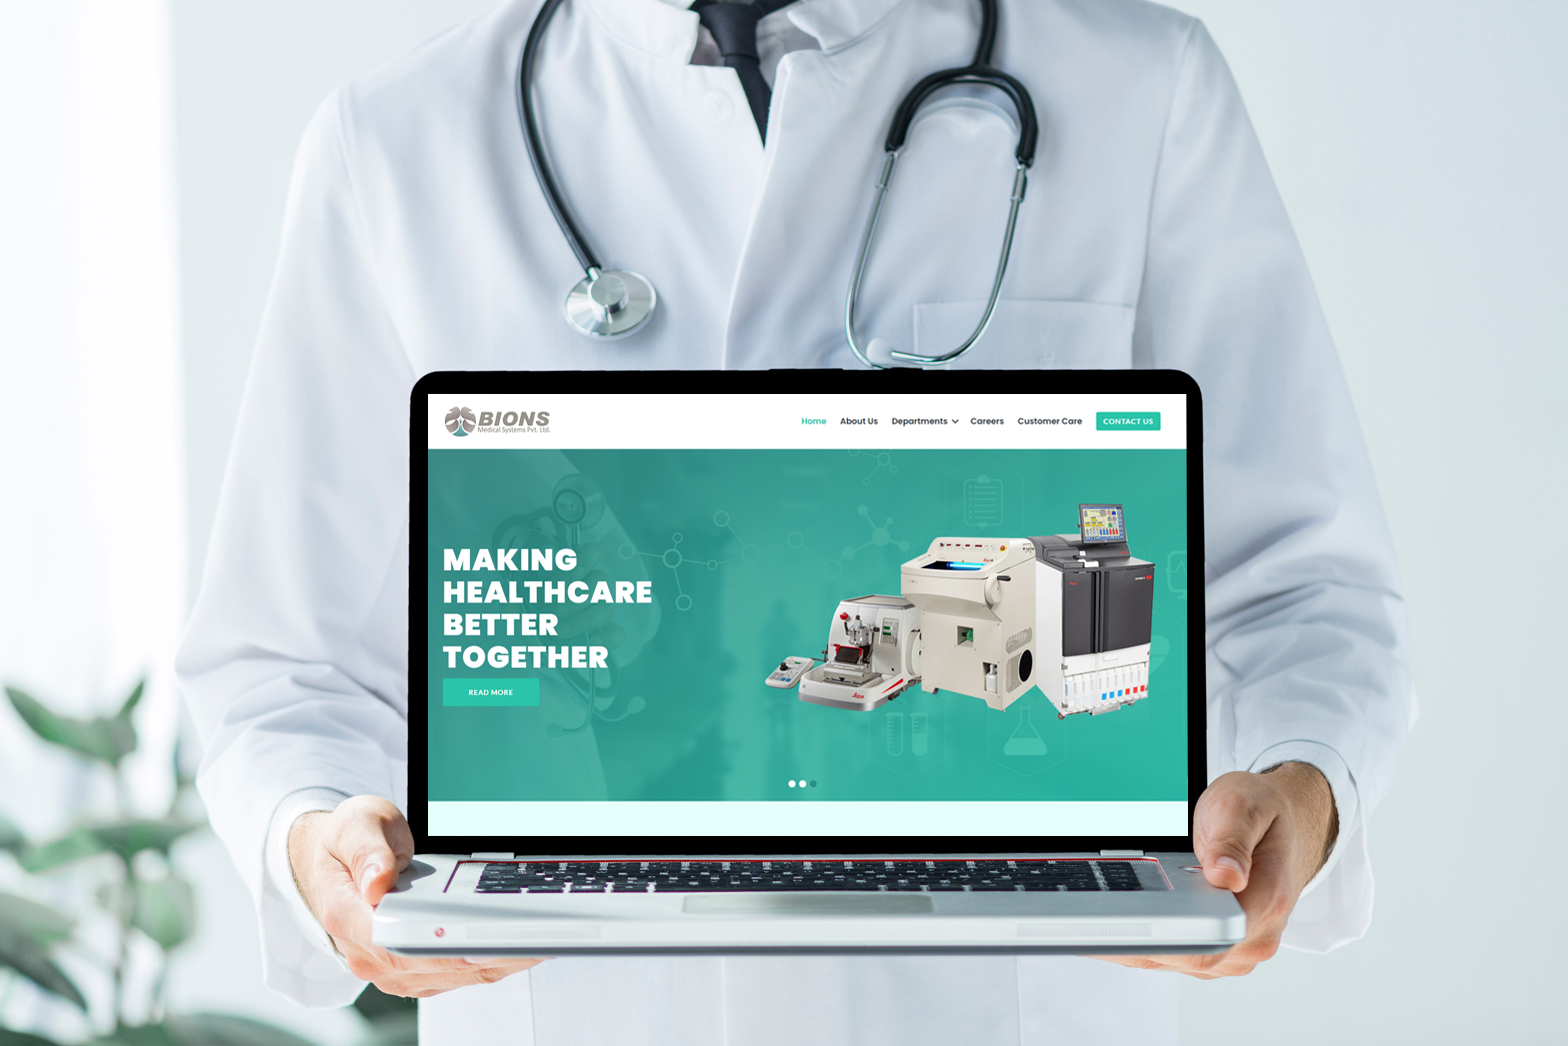 Making Healthcare Better Together With BIONS Medical Systems